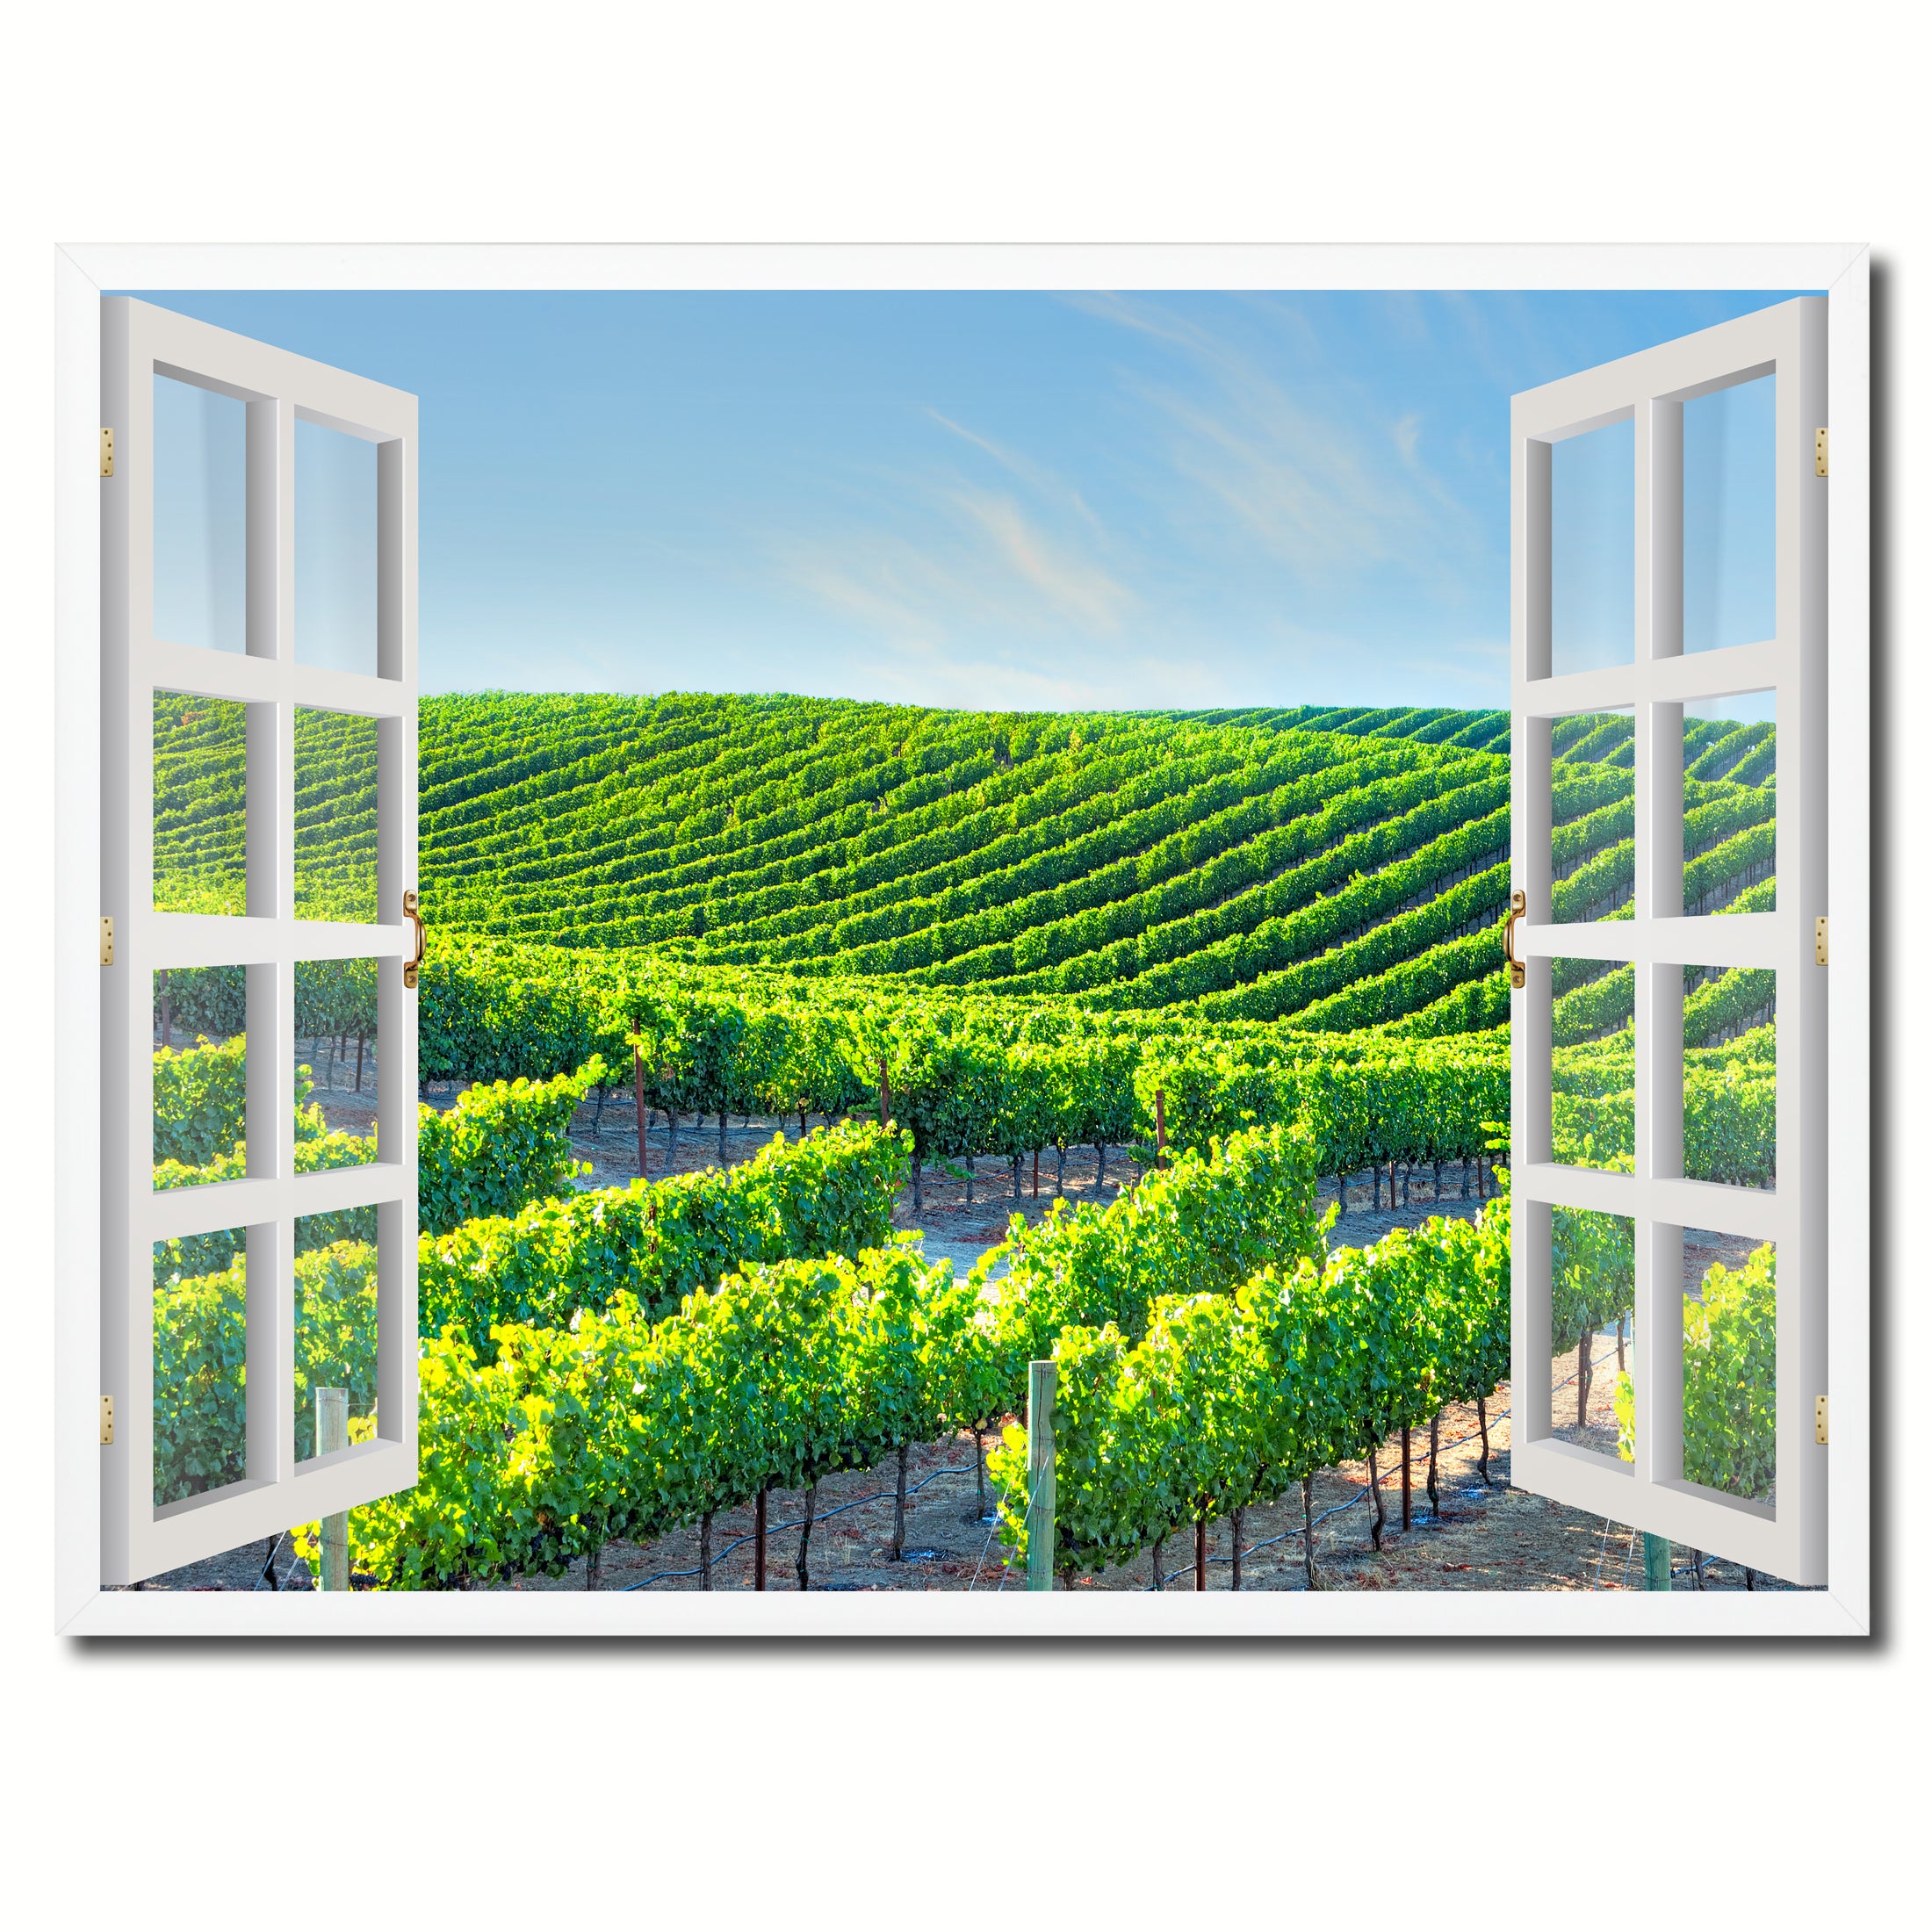 Wine Vineyards Napa Valley California Picture French Window Framed Canvas Print Home Decor Wall Art Collection